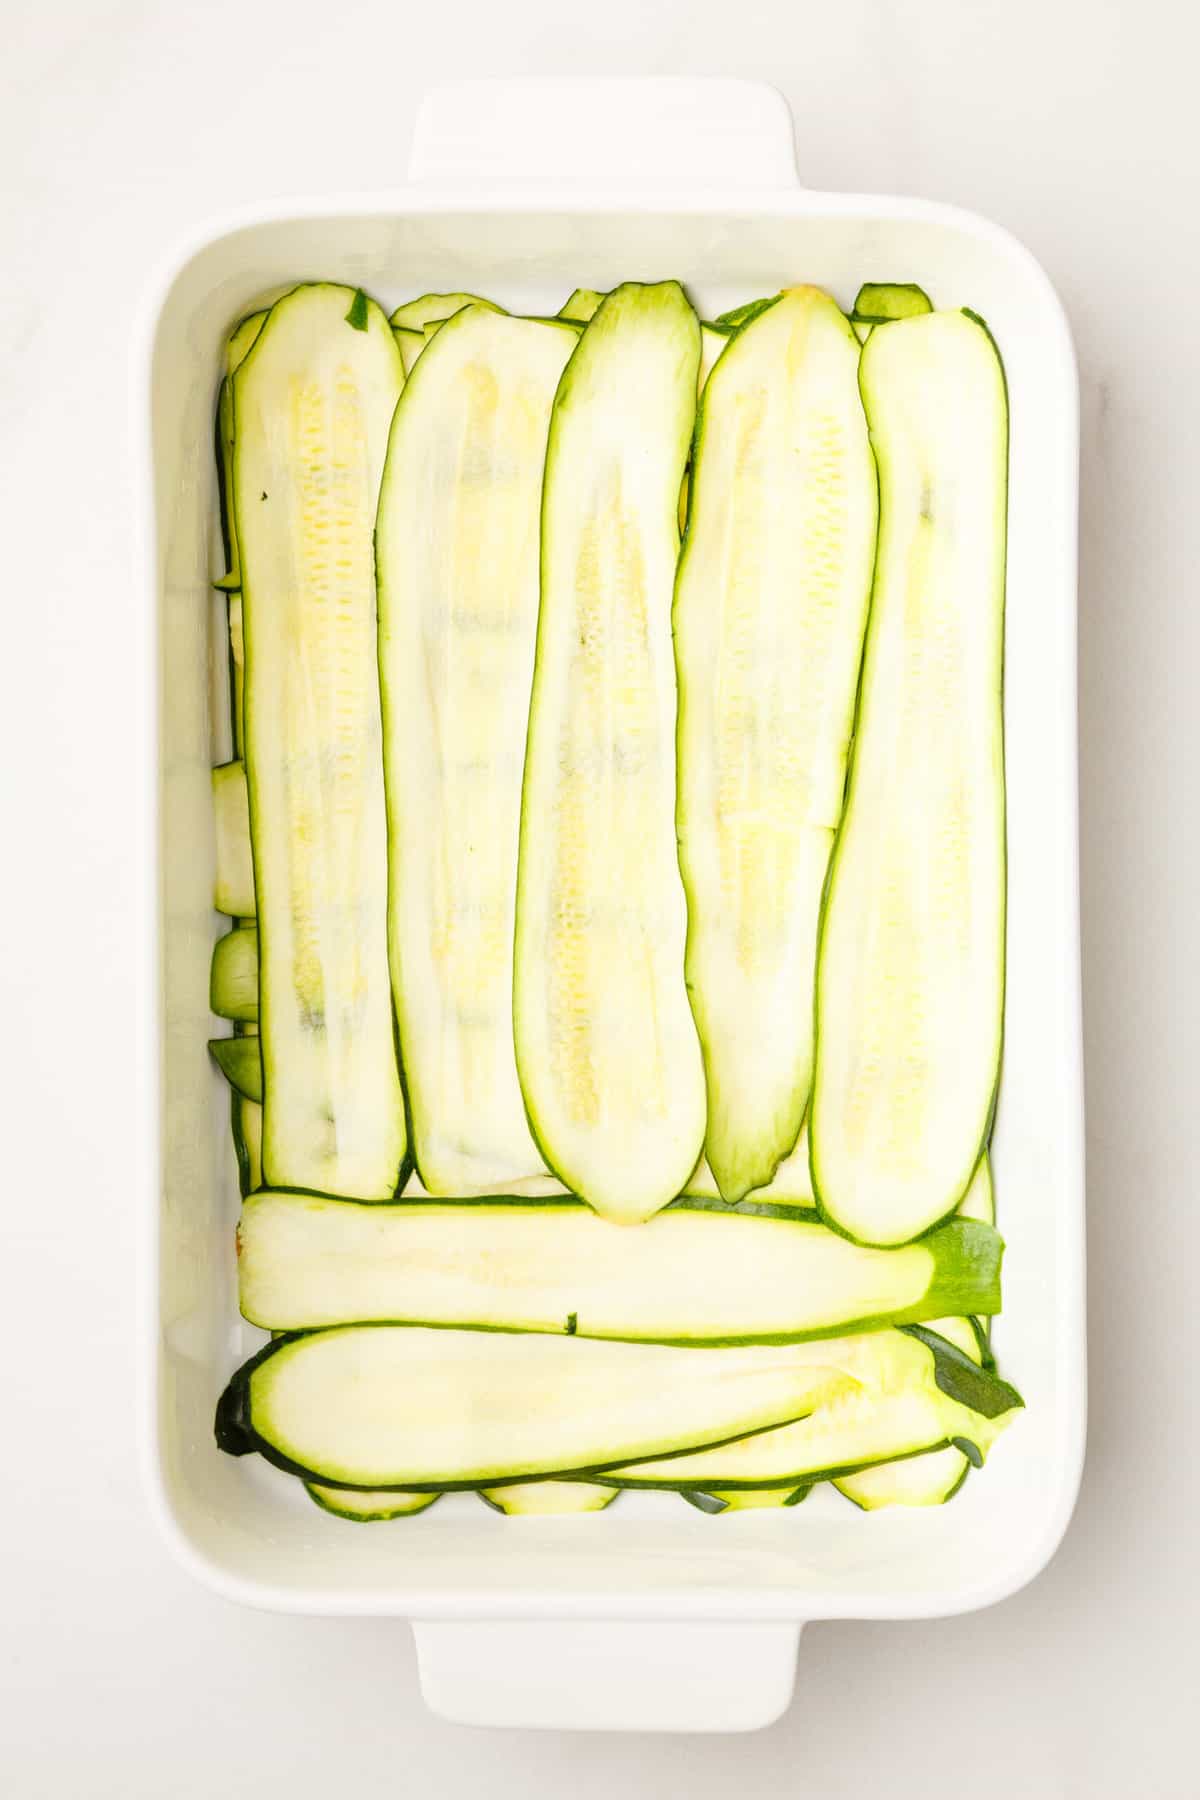 thinly sliced zucchini layered at the bottom of a 9x13 casserole dish